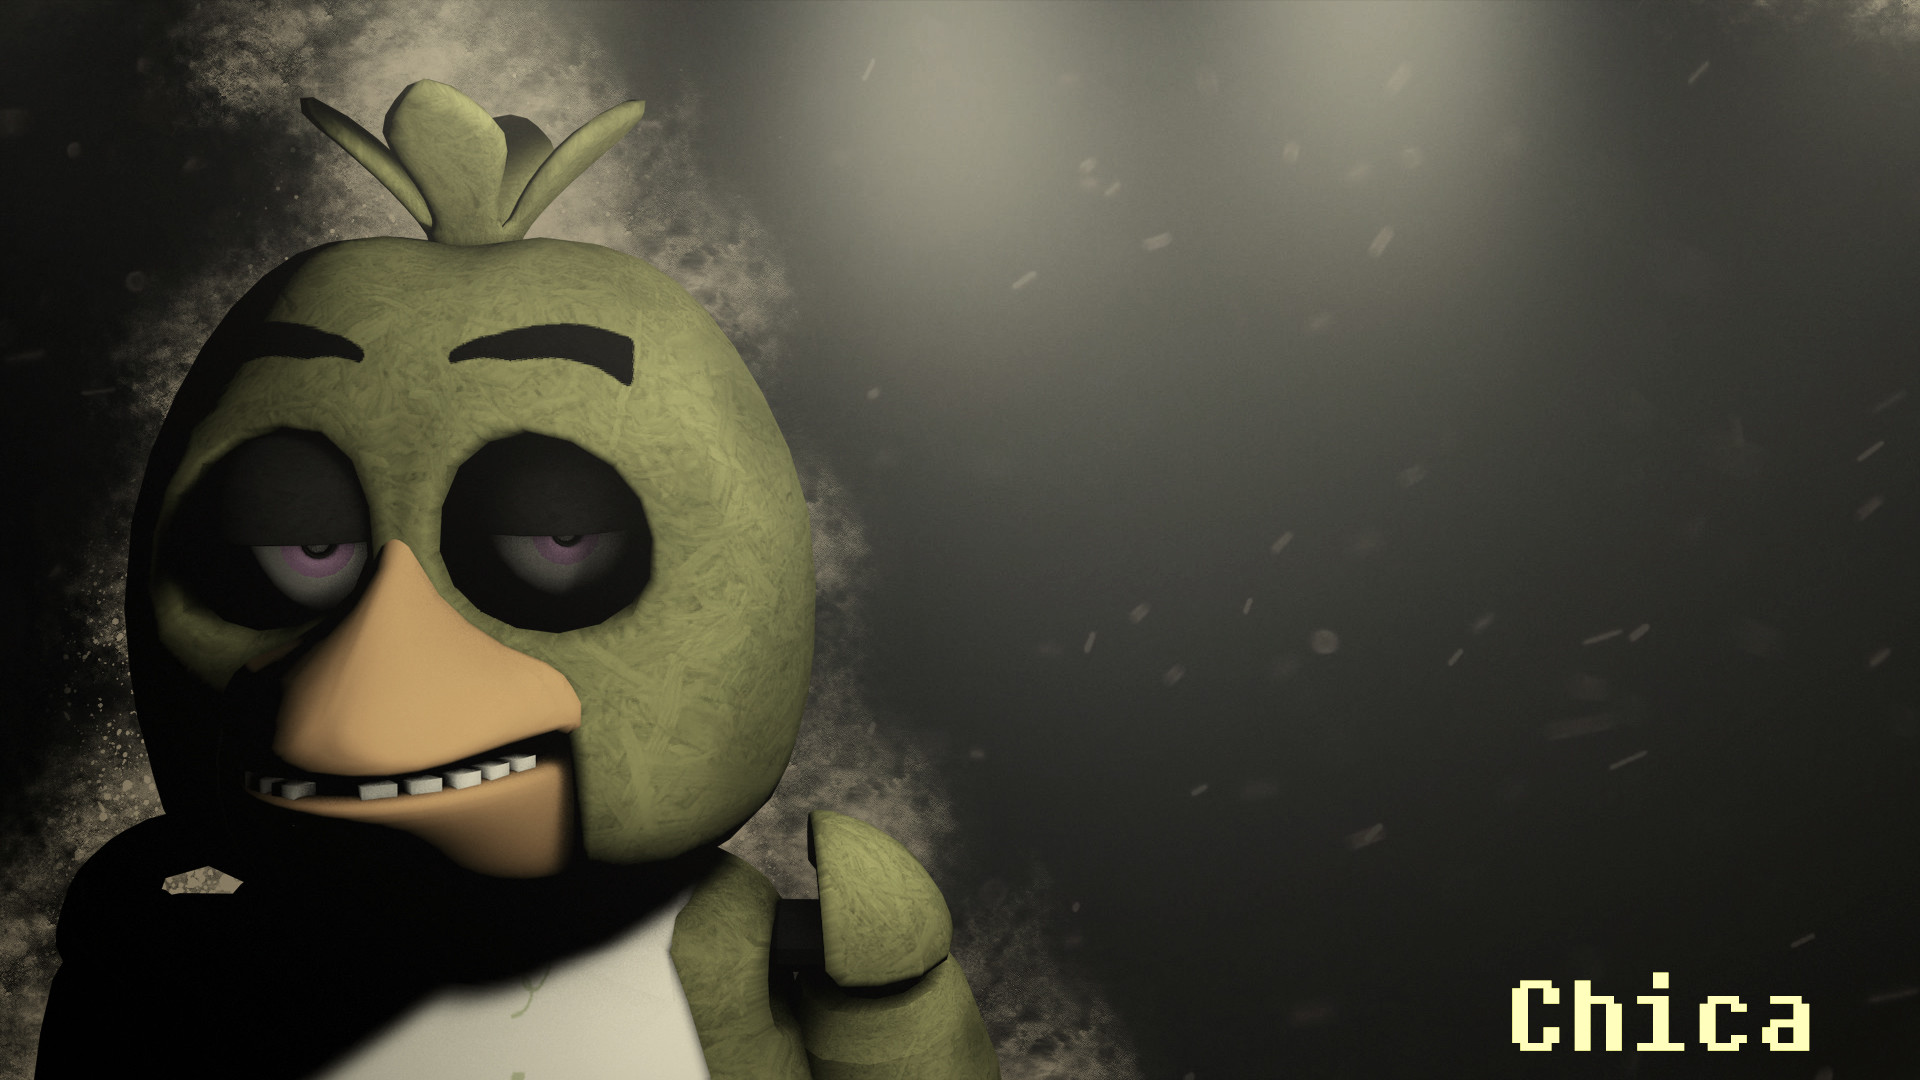 … Five Nights at Freddy's Chica Wallpaper DOWNLOAD by NiksonYT